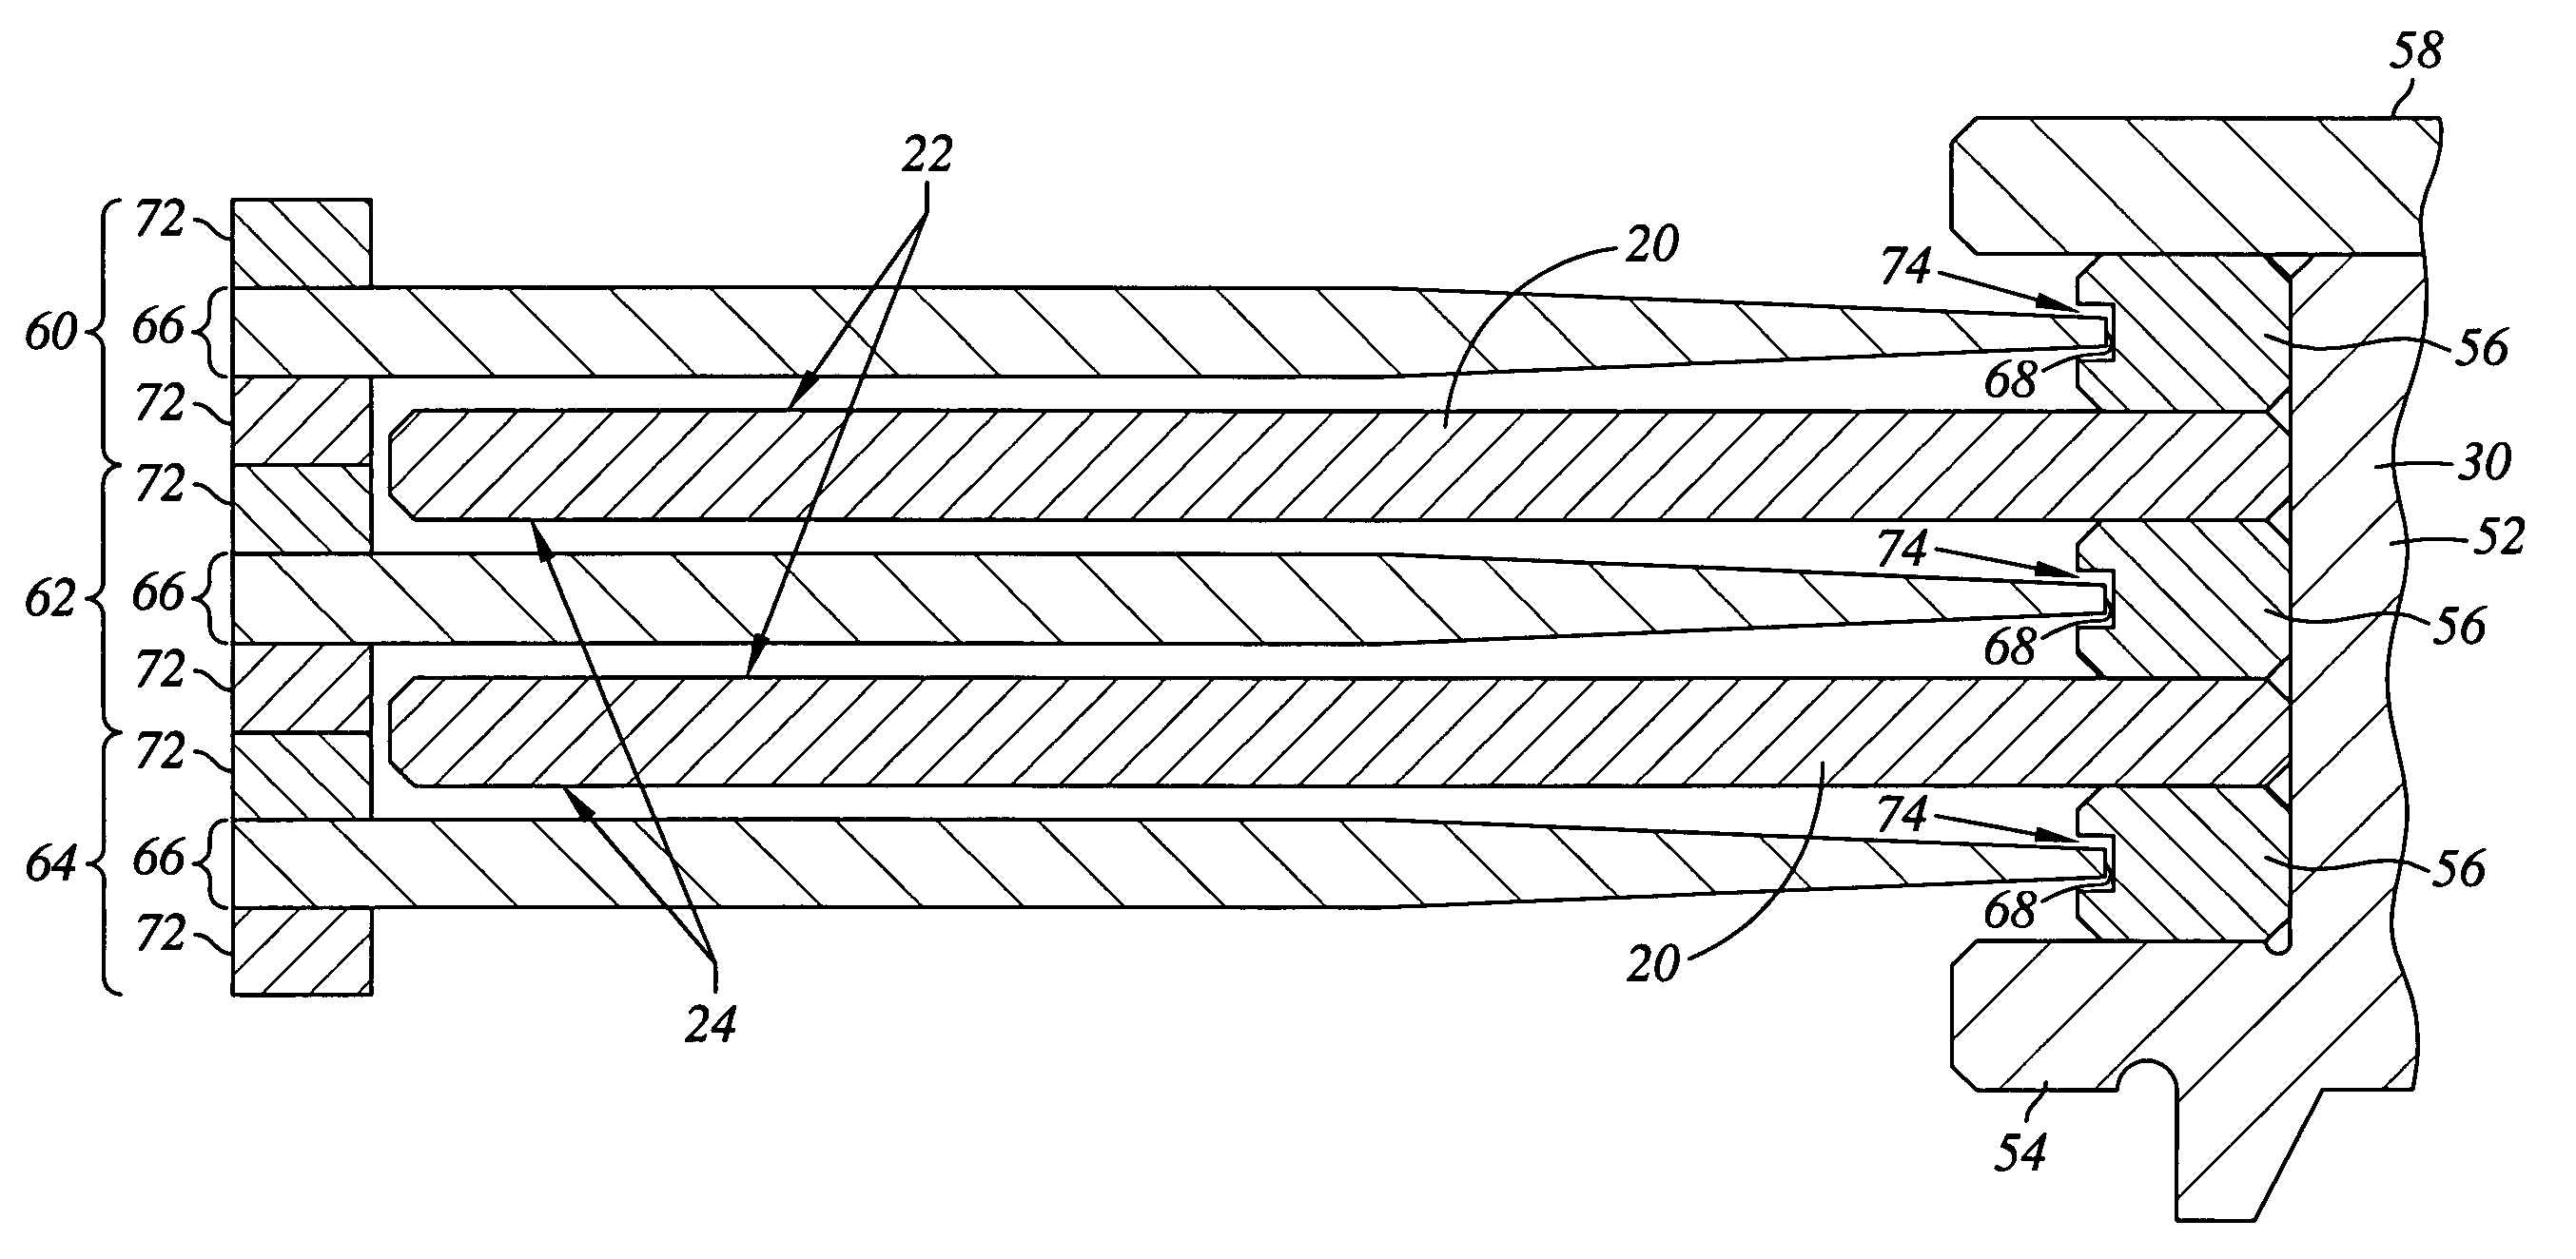 Disk drive including a disk plate overlapping a disk spacer in a circumferential disk spacer opening